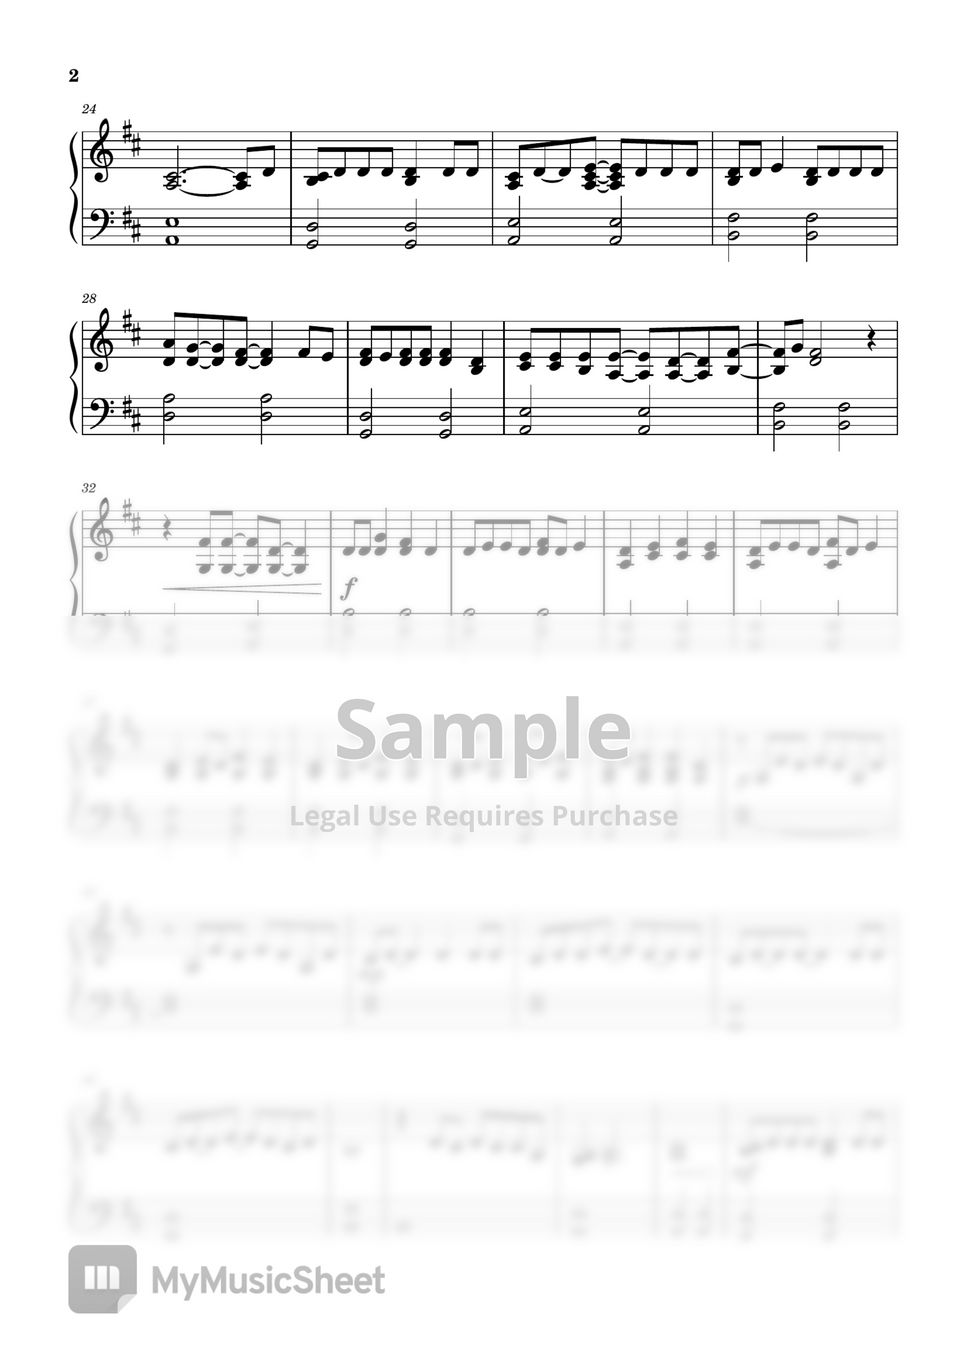 Taylor Swift - Love Story Sheets by M. Galka